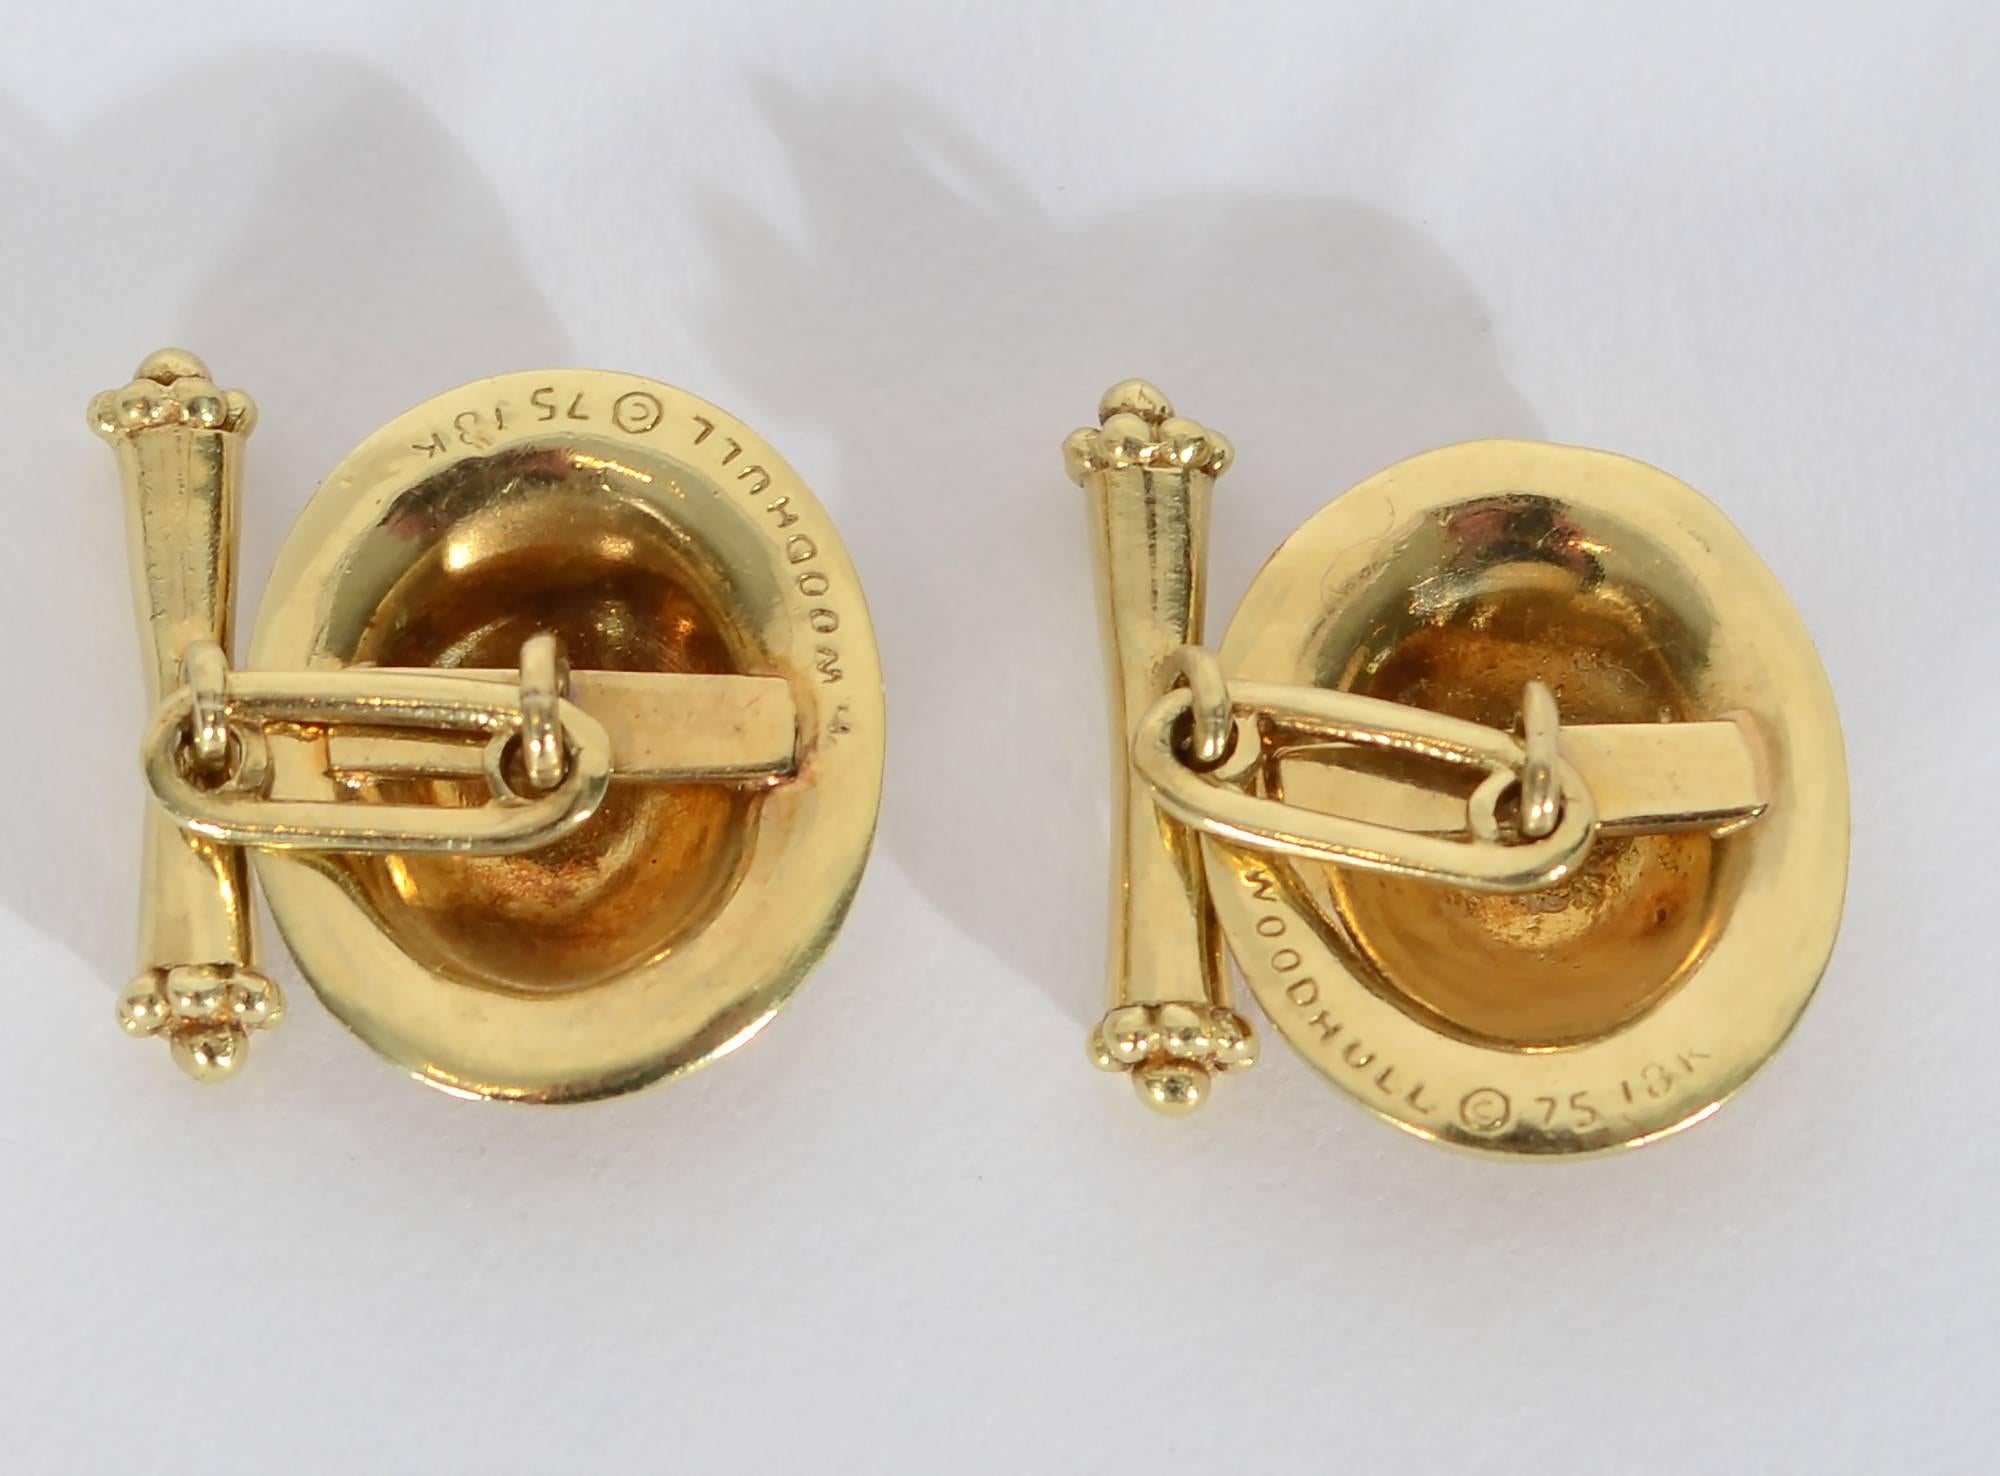 Oval cufflinks with a frame of gold balls by New York's late jewelry designer, Helen Woodhull. In addition to having her own ateliers, at various times Woodhull designed for Cartier; Tiffany and Georg Jensen. She died in 2005.
Much of Woodhull's